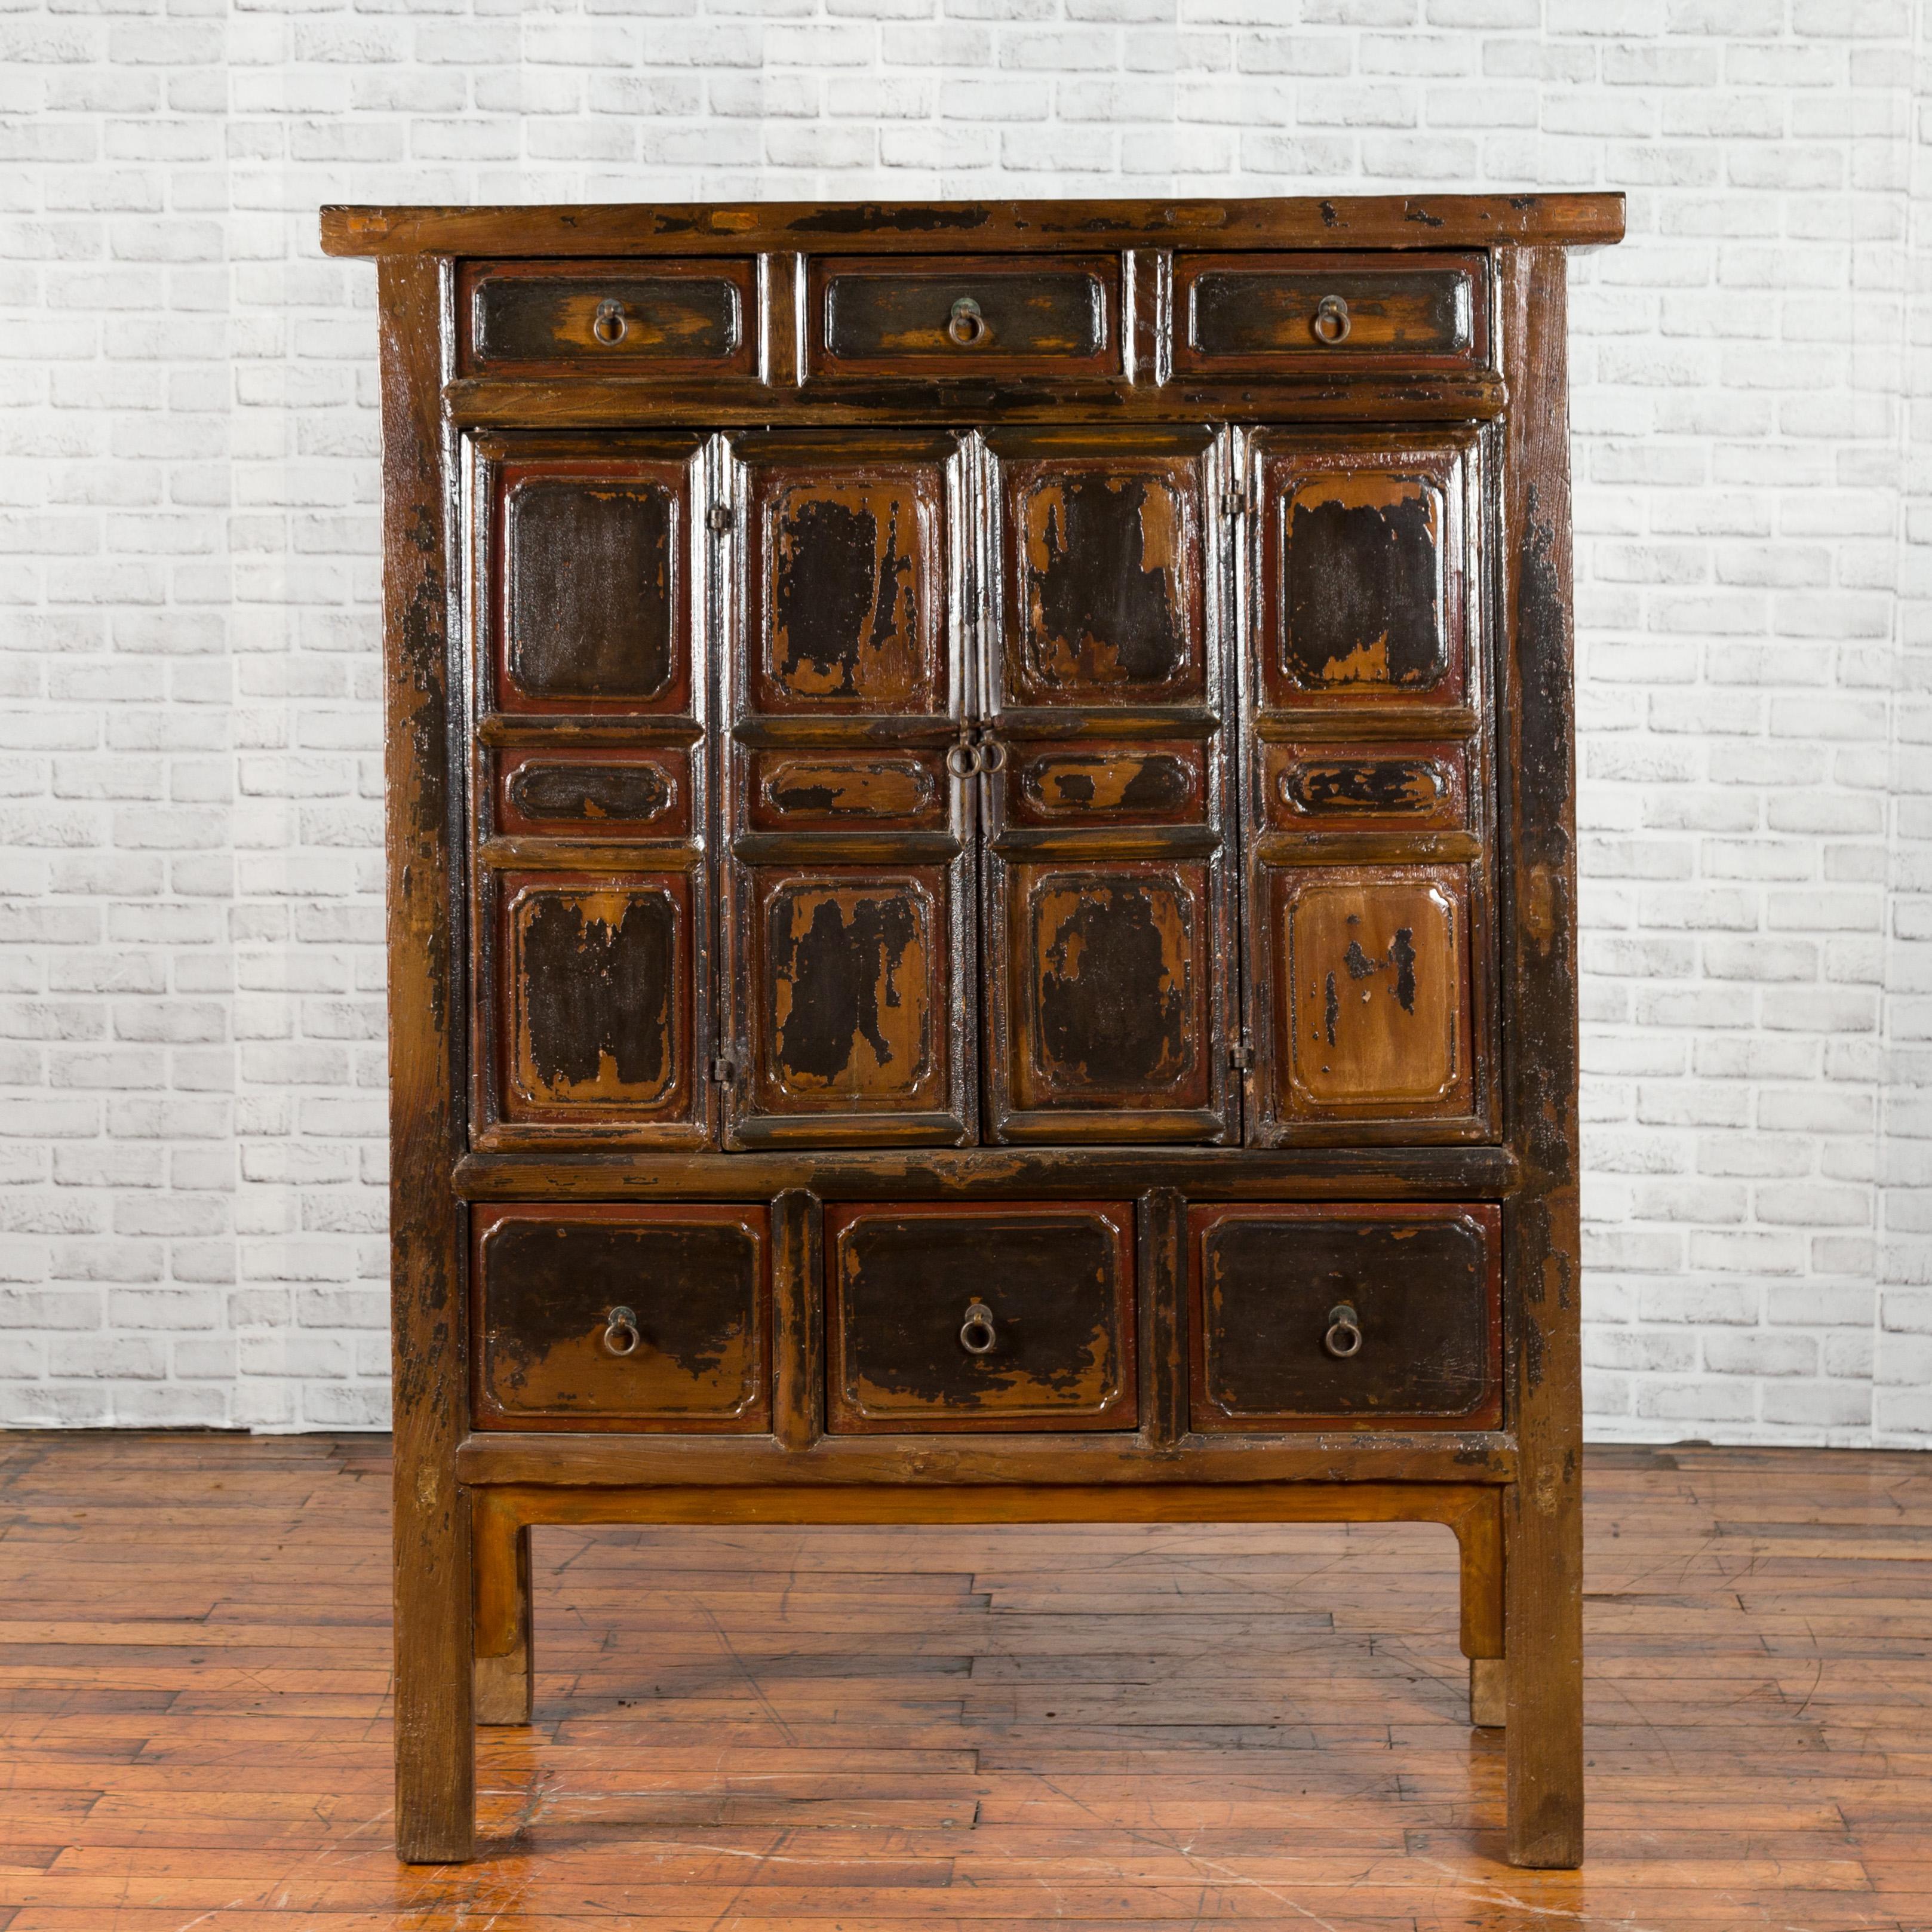 A Chinese Qing dynasty cabinet from the mid-19th century, with distressed patina, six drawers and folding doors. Created in China during the 1850s, this small cabinet features a simple cornice sitting above three drawers fitted with ring pulls. The